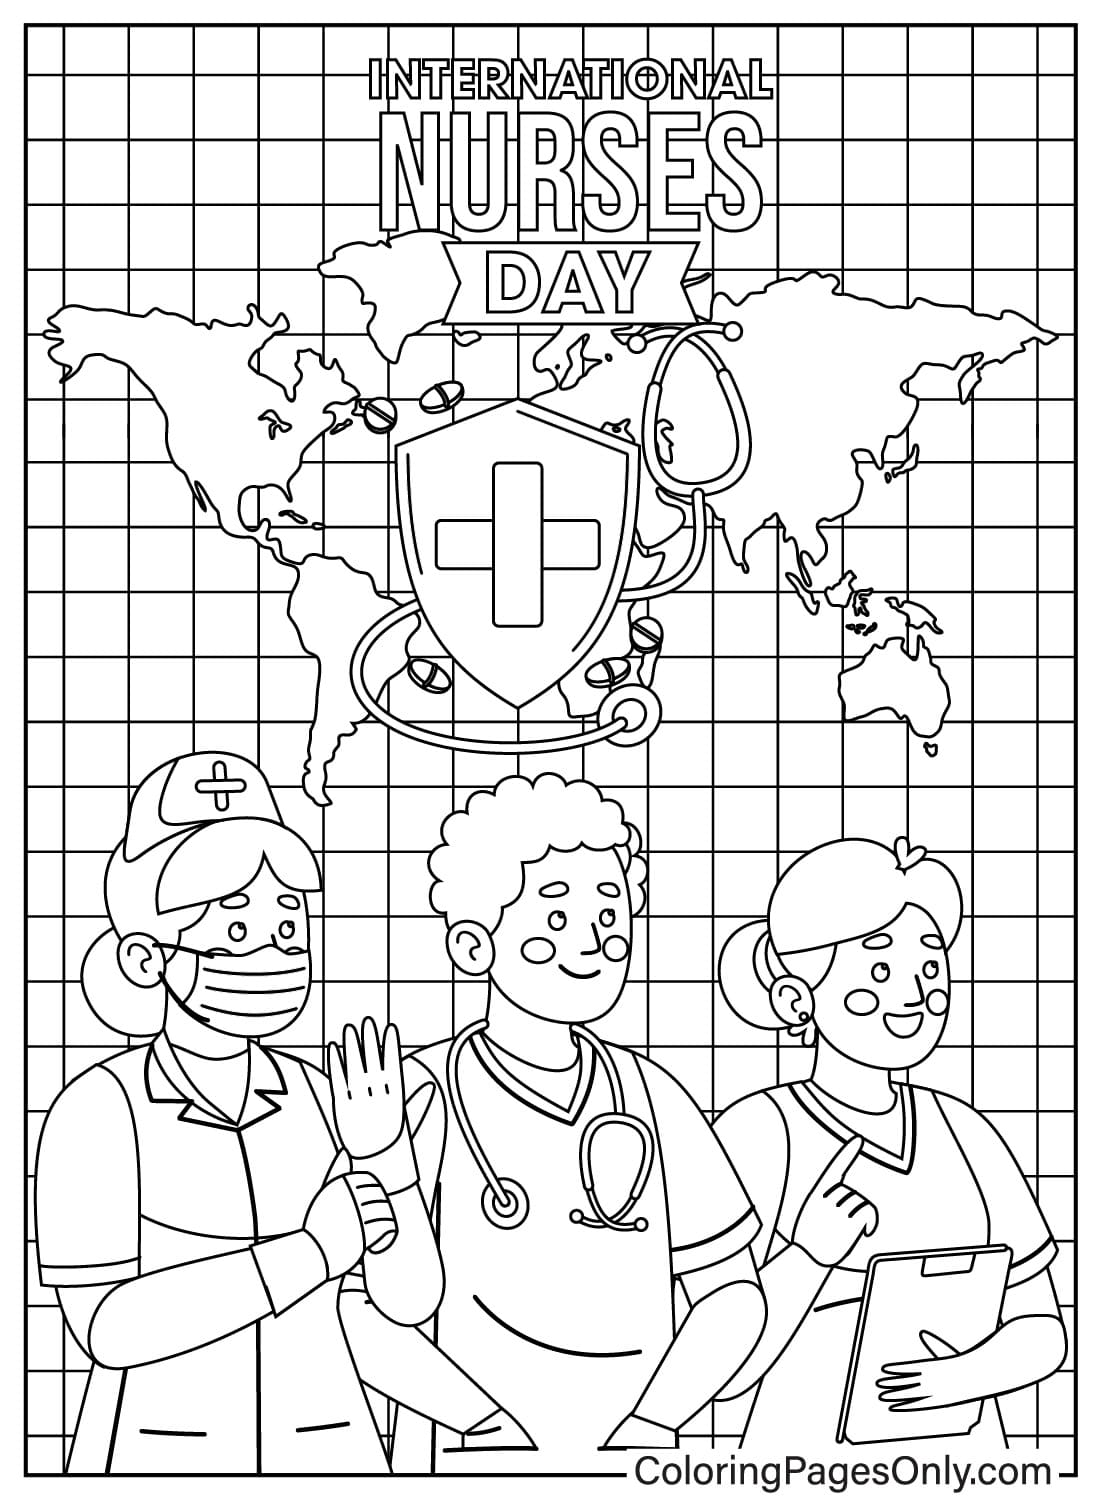 International Nurses Day Coloring Page for Kids from Nurse